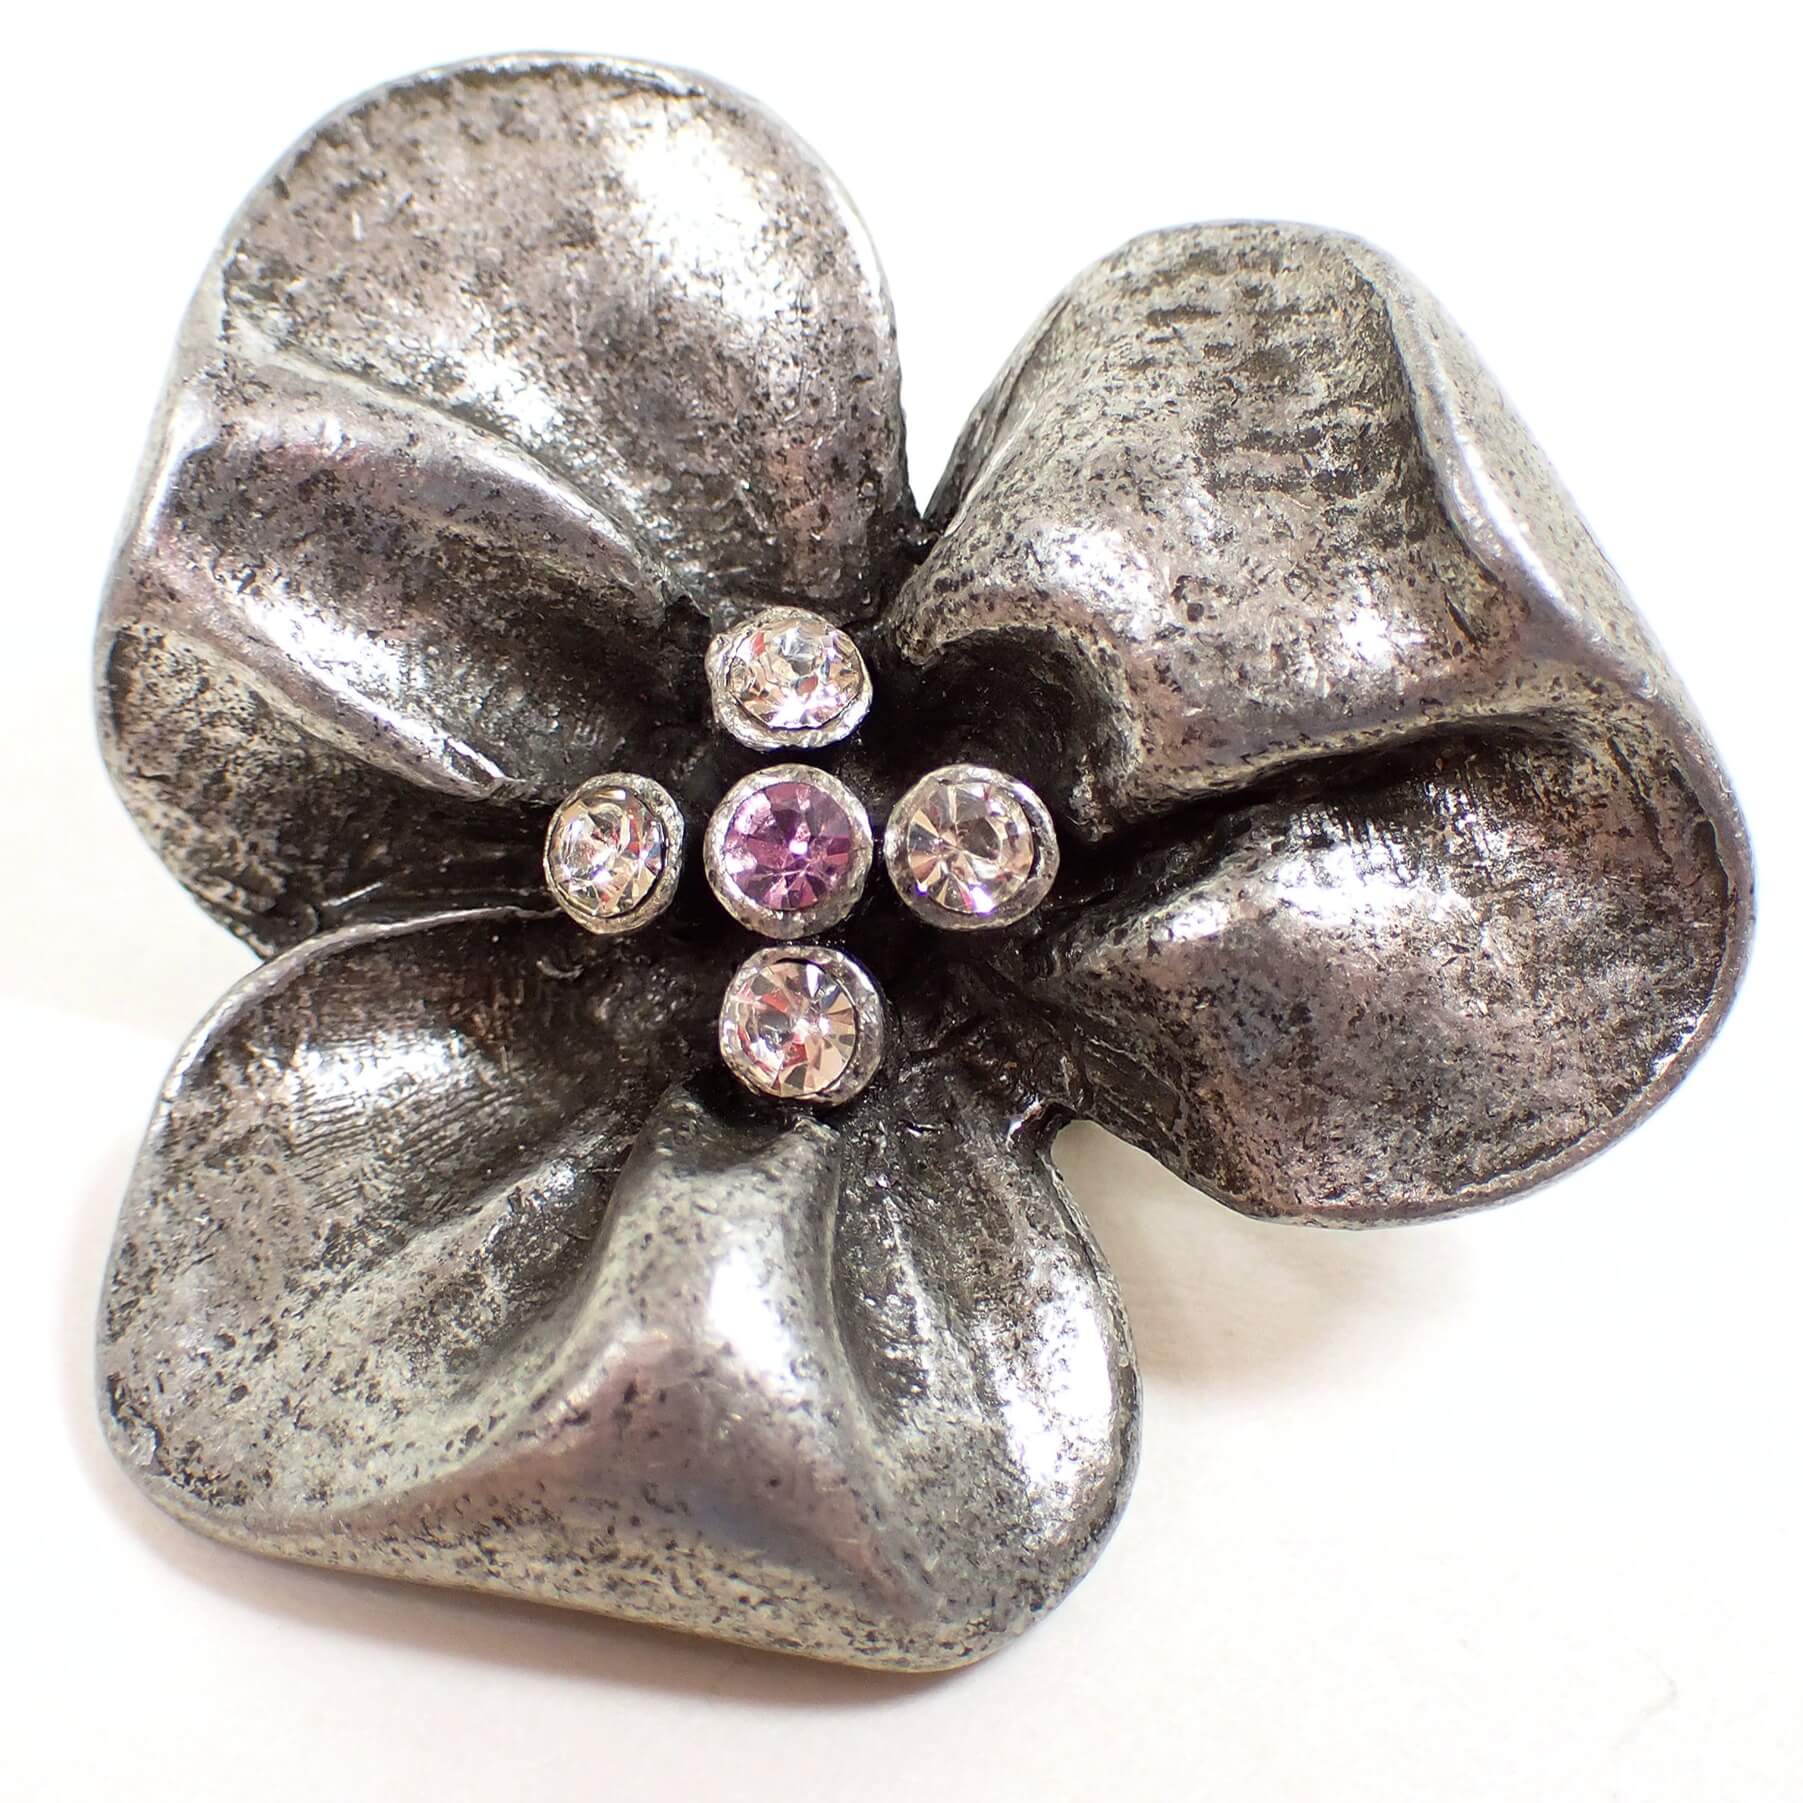 Front view of the retro vintage flower broch pin. The metal is pewter and has a gray and dark gray appearance. There are three rounded wide petals with rhinestones in the middle of the flower. There are four small round clear rhinestones surrounding a middle rhinestone that is pink or purple depending on the lighting.